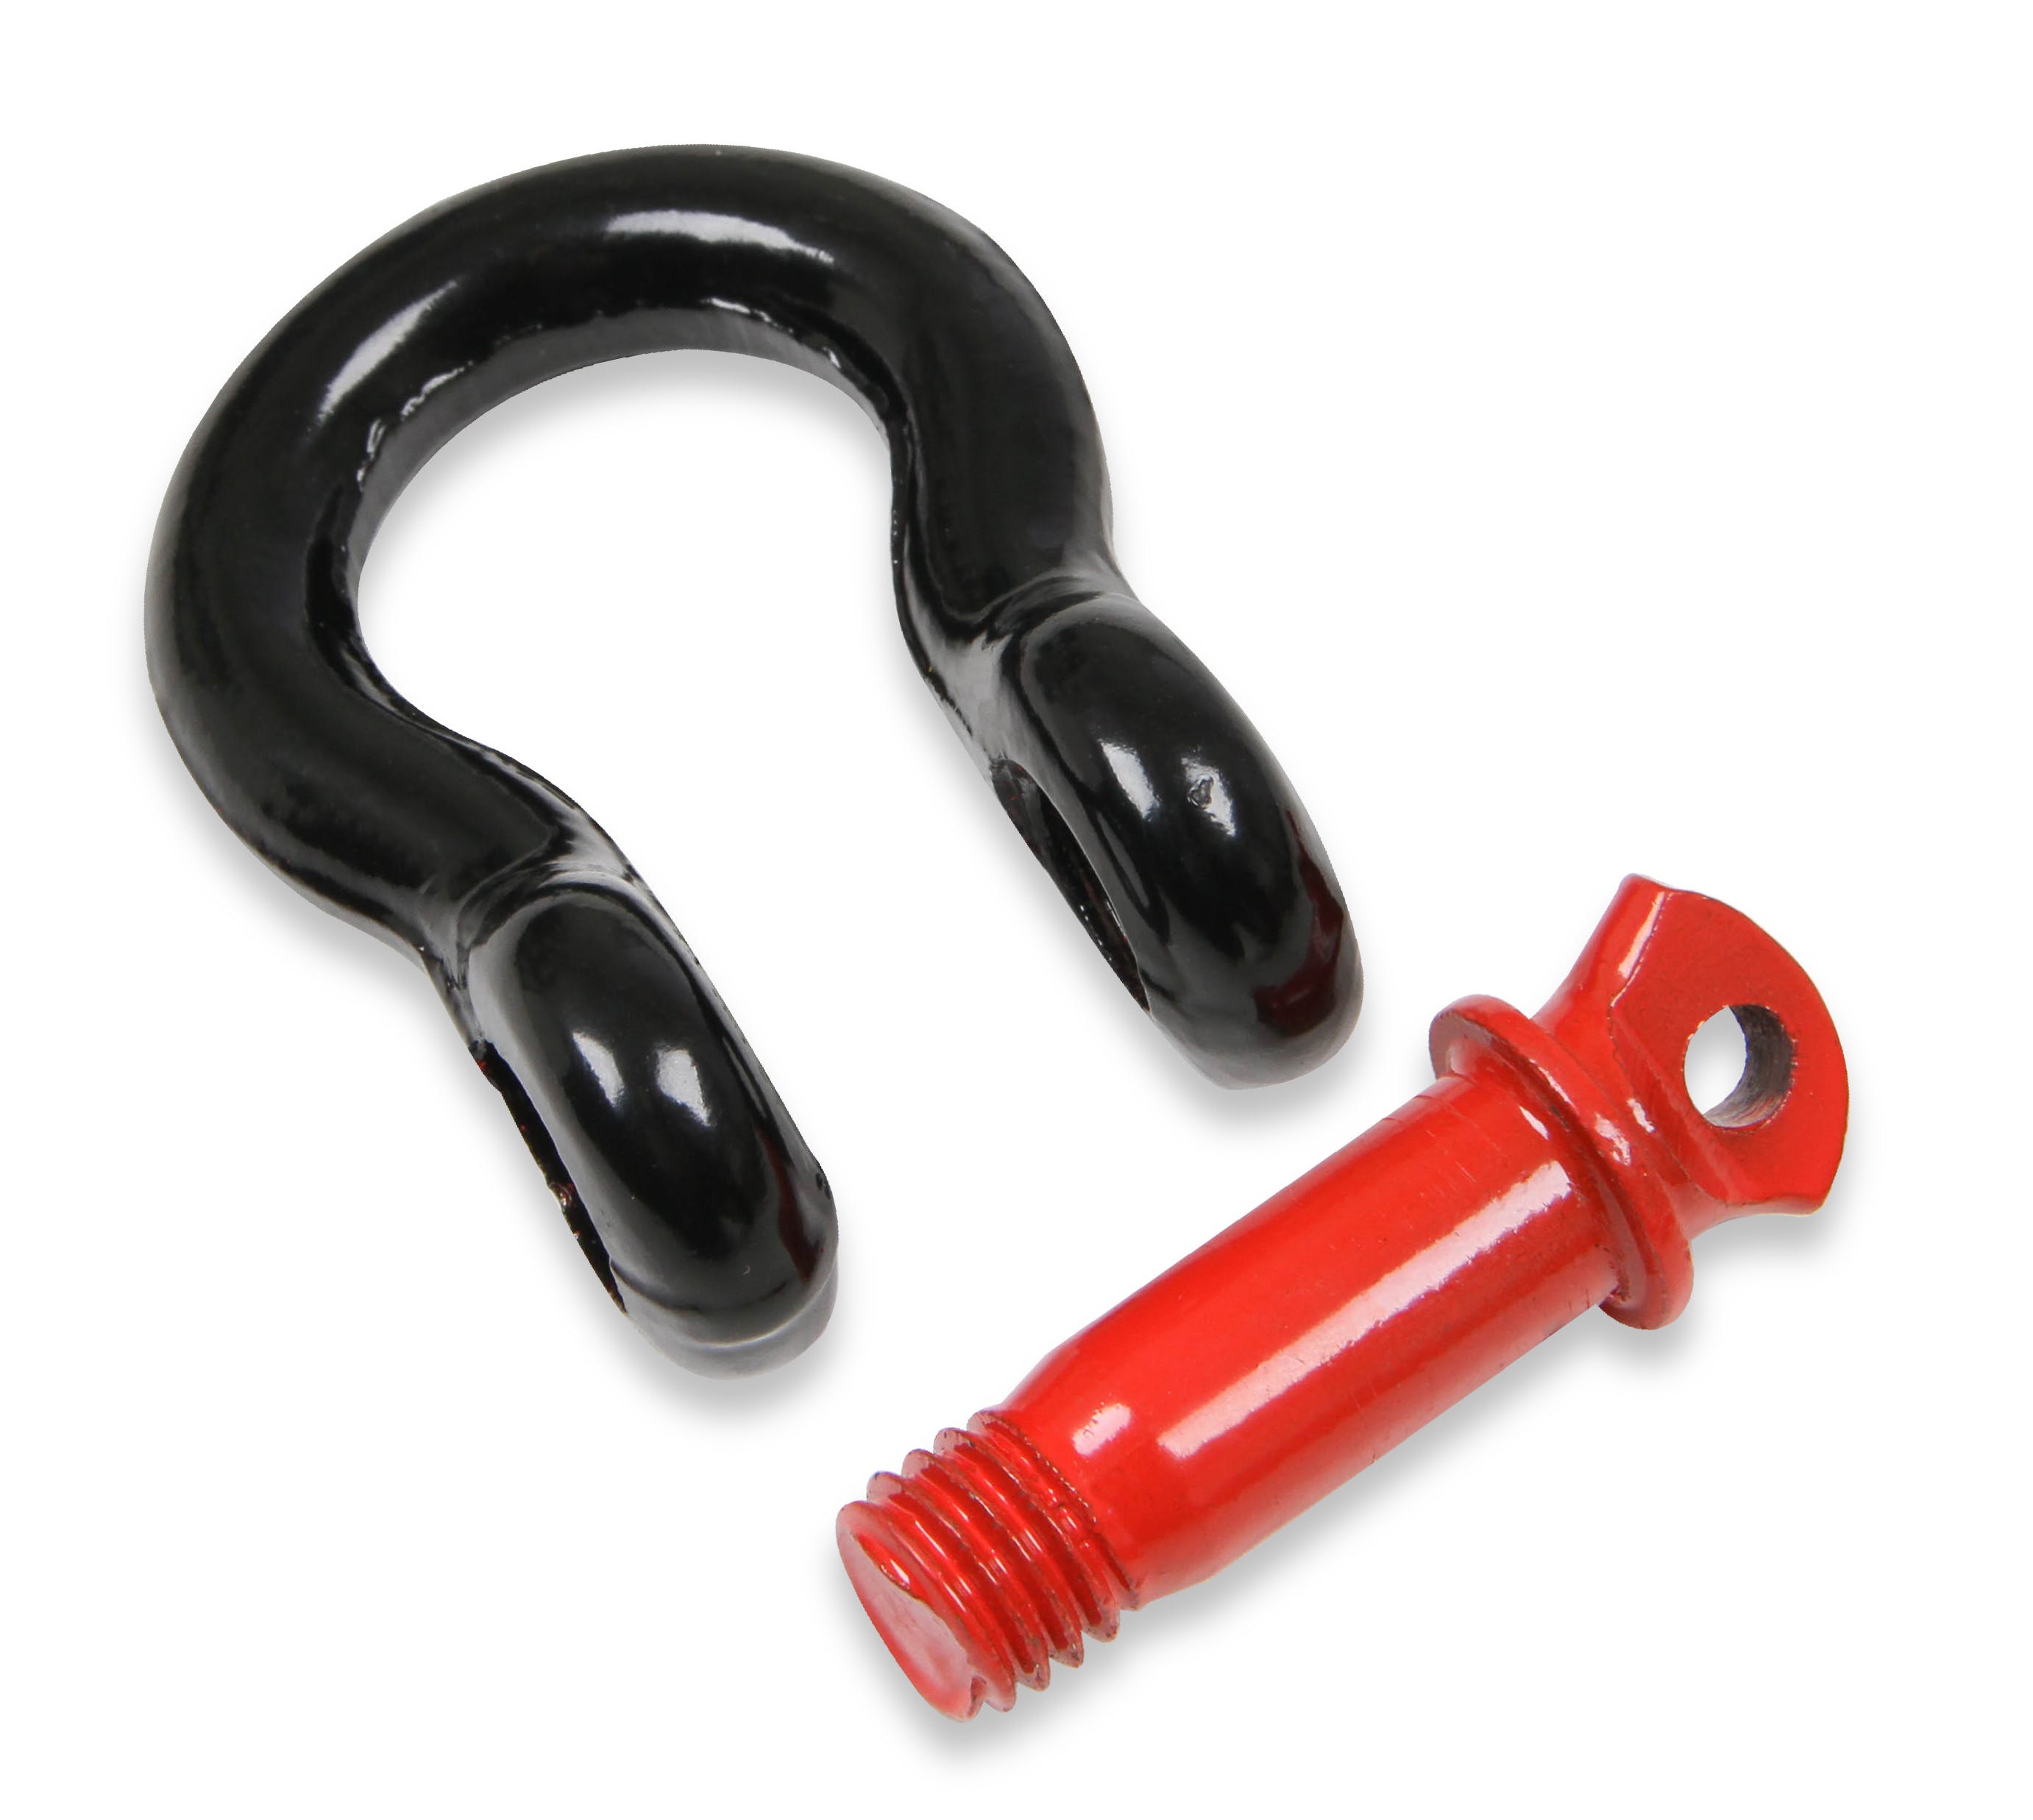 Anvil Off-Road 1093AOR BOW SHACKLE 1/2 IN. 4K LBS BLACK